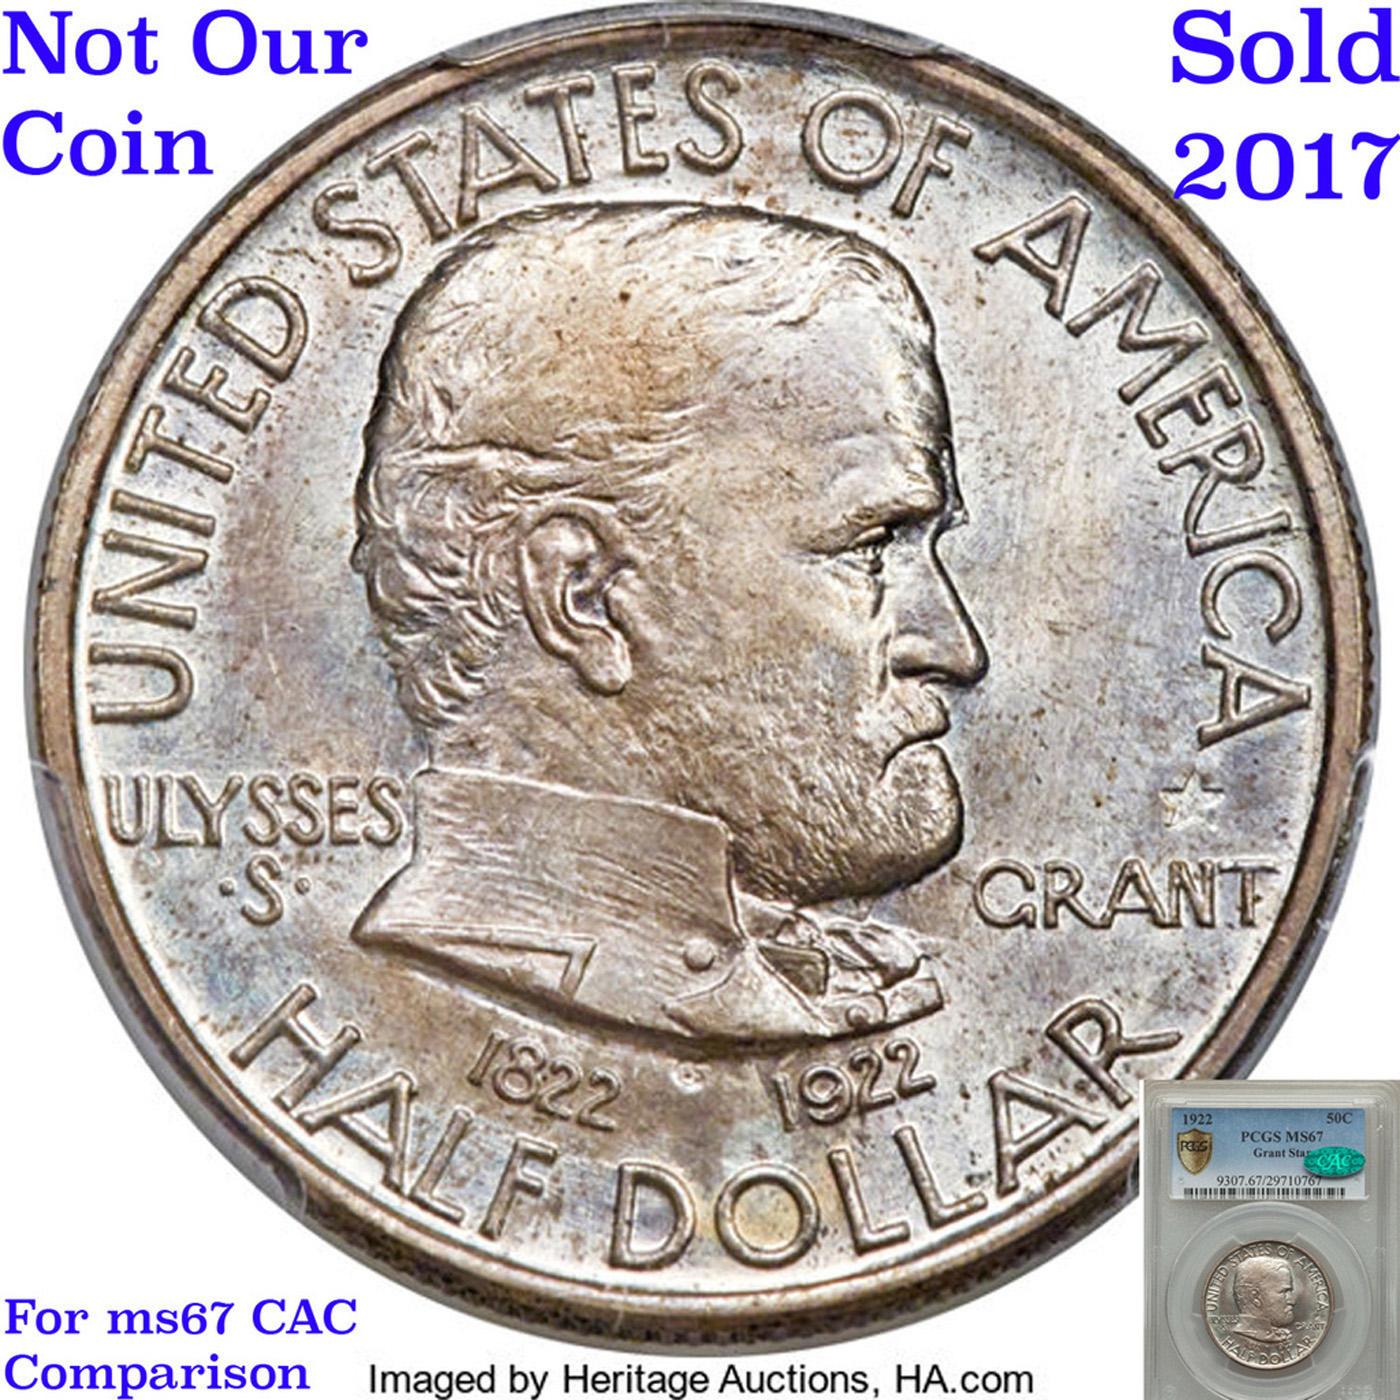 *HIGHLIGHT OF ENTIRE AUCTION* 1922 Grant w/Star Old Commem Half Dollar 50c Graded ms67 By SEGS (fc)